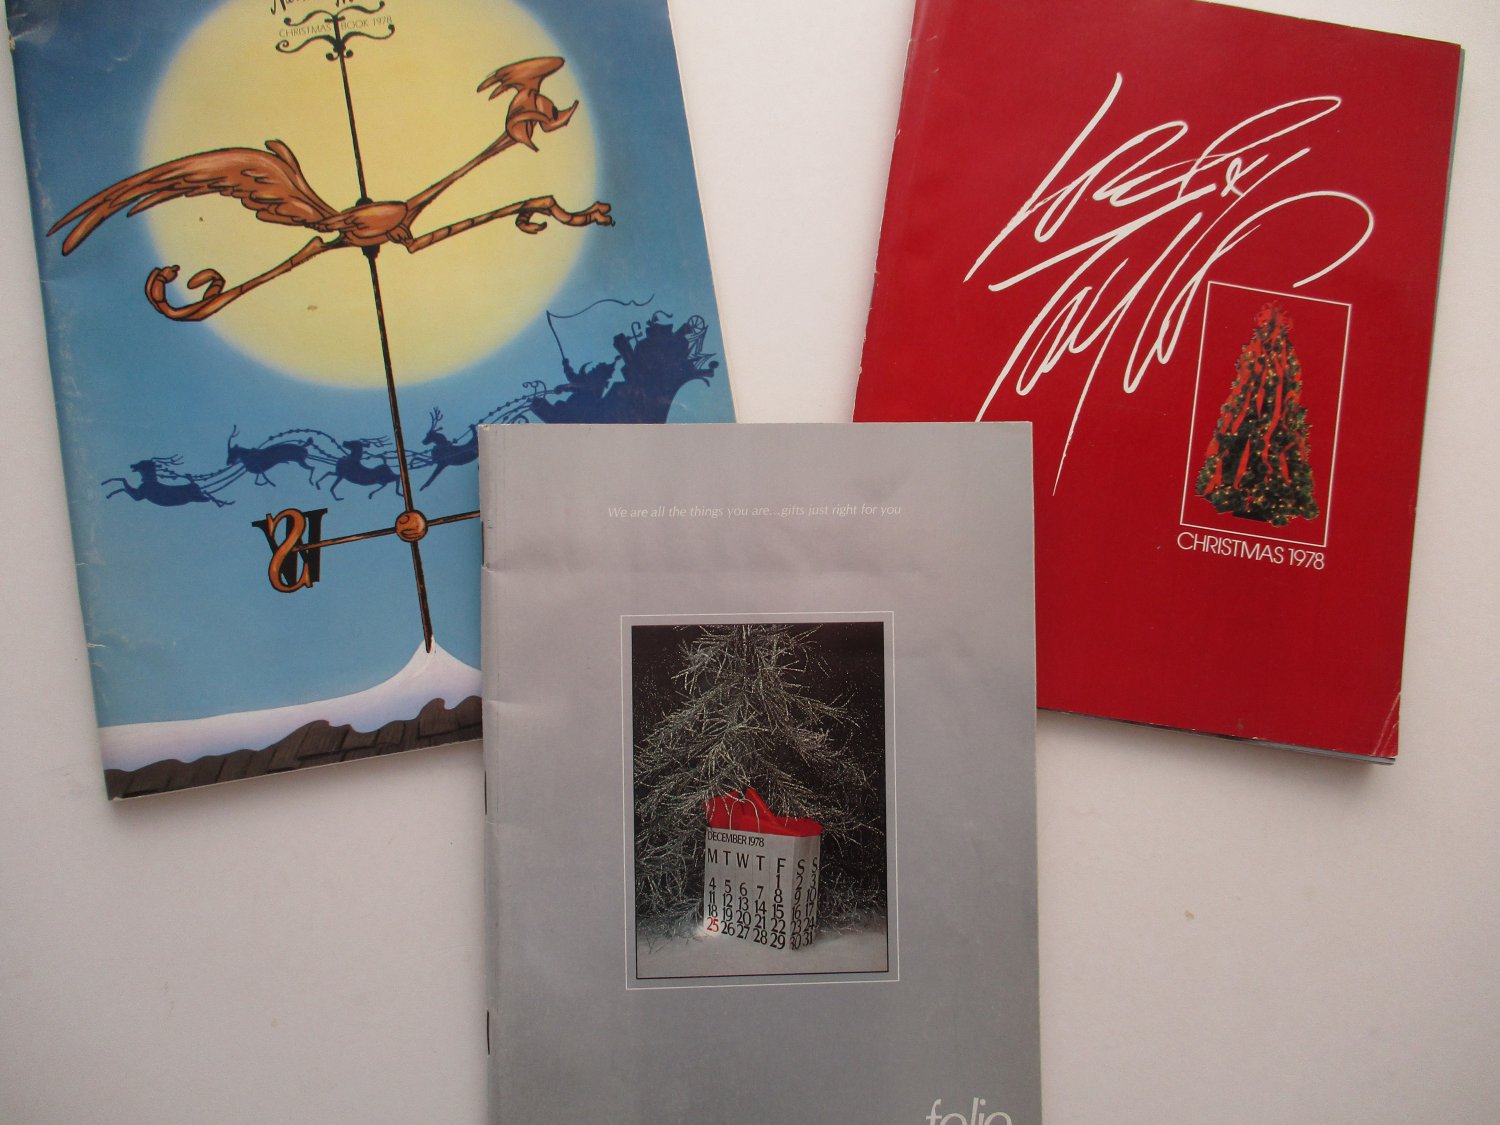 Lot 3 Christmas Catalogs from 1978: Nieman Marcus, Saks, Lord & Taylor